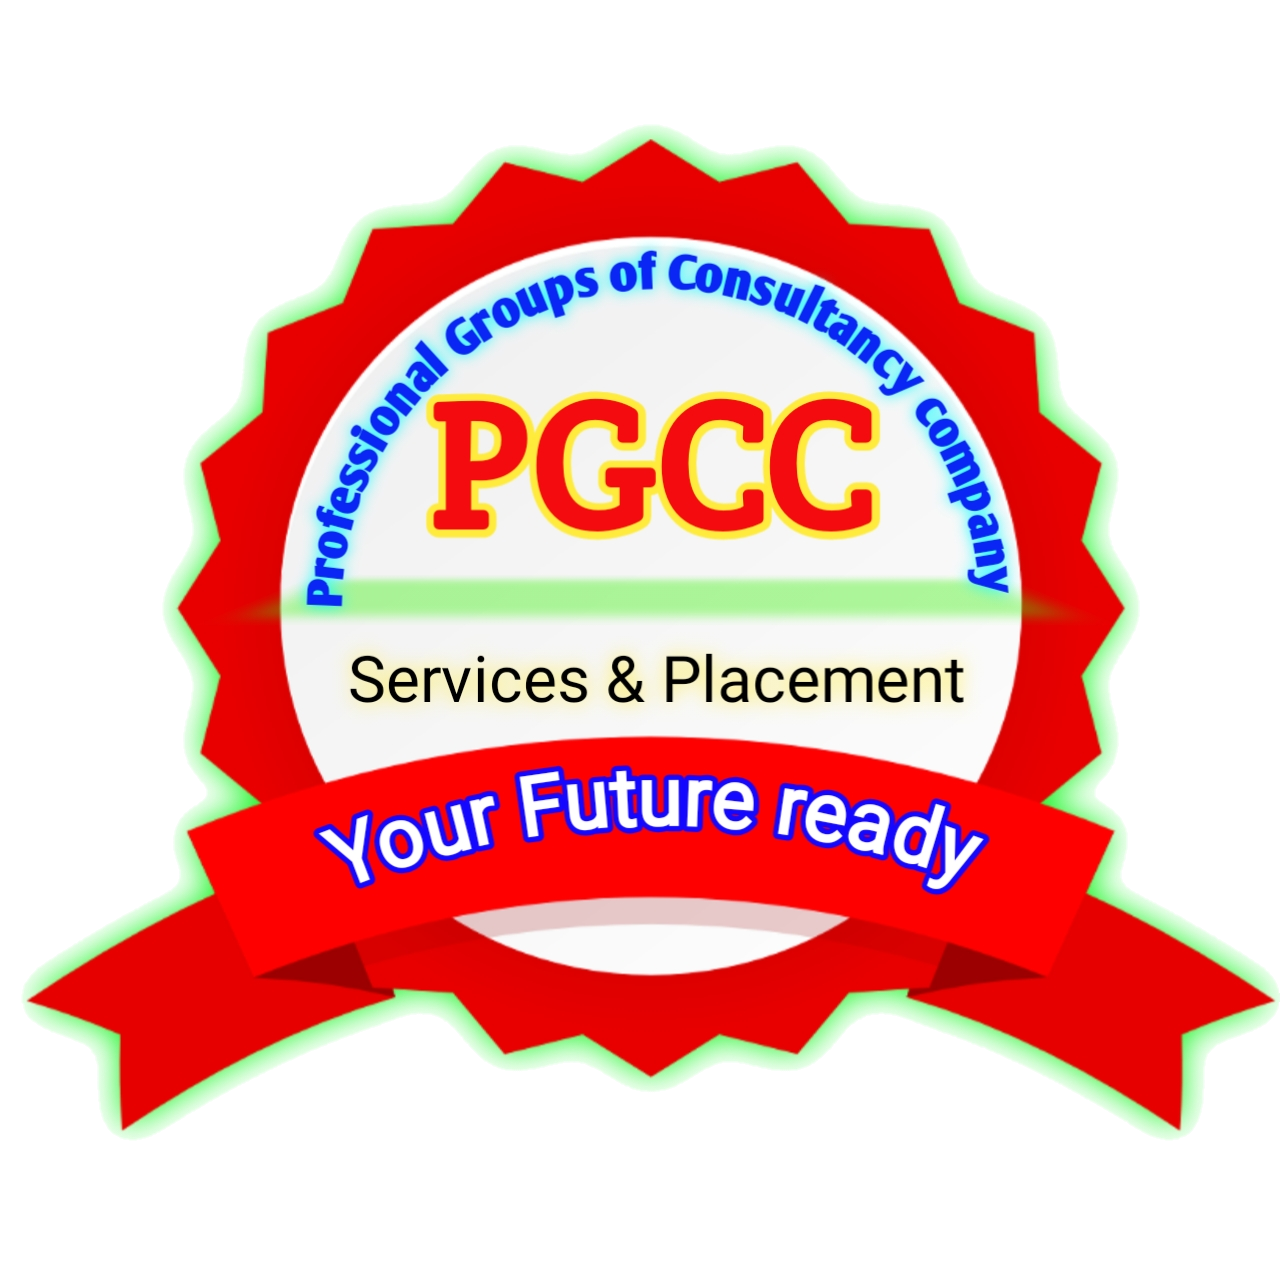 Professional Groups of Consultancy Company